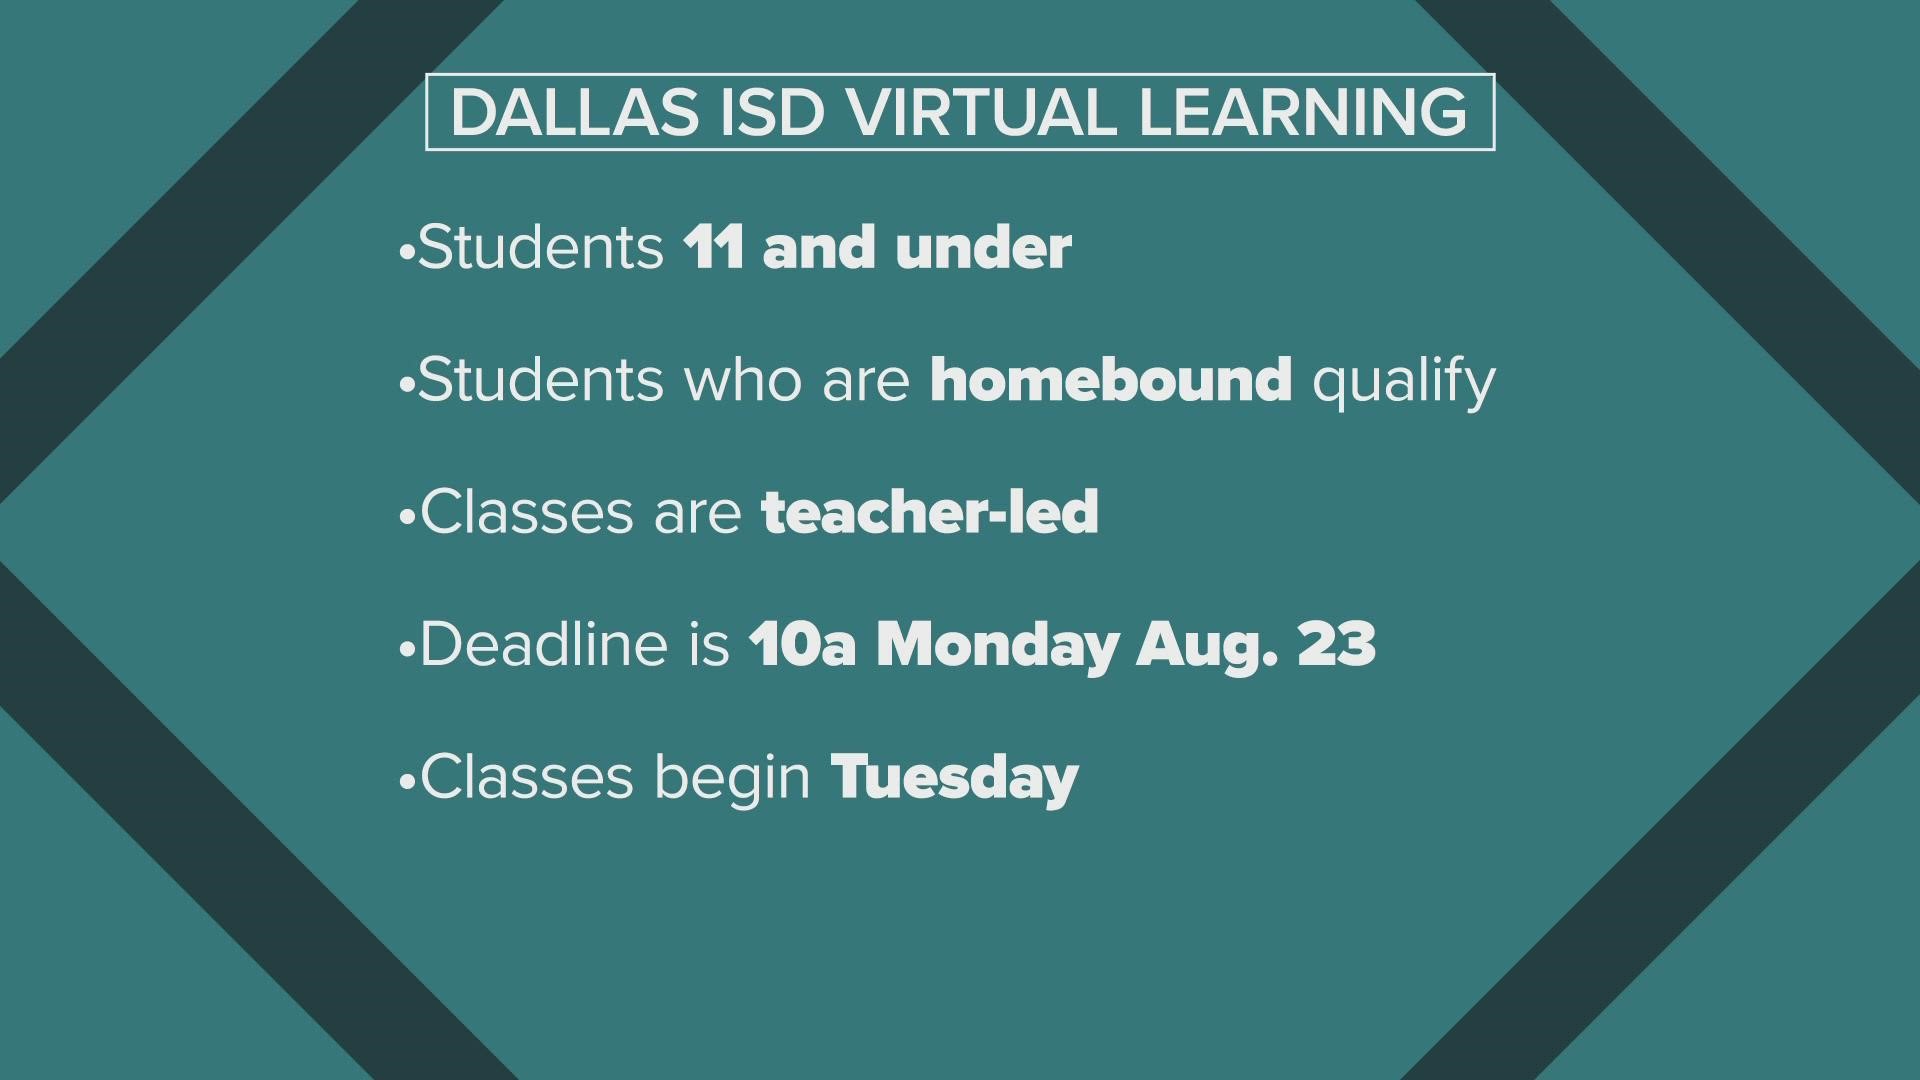 The virtual learning option is only for students 11 and under as of Aug. 16.